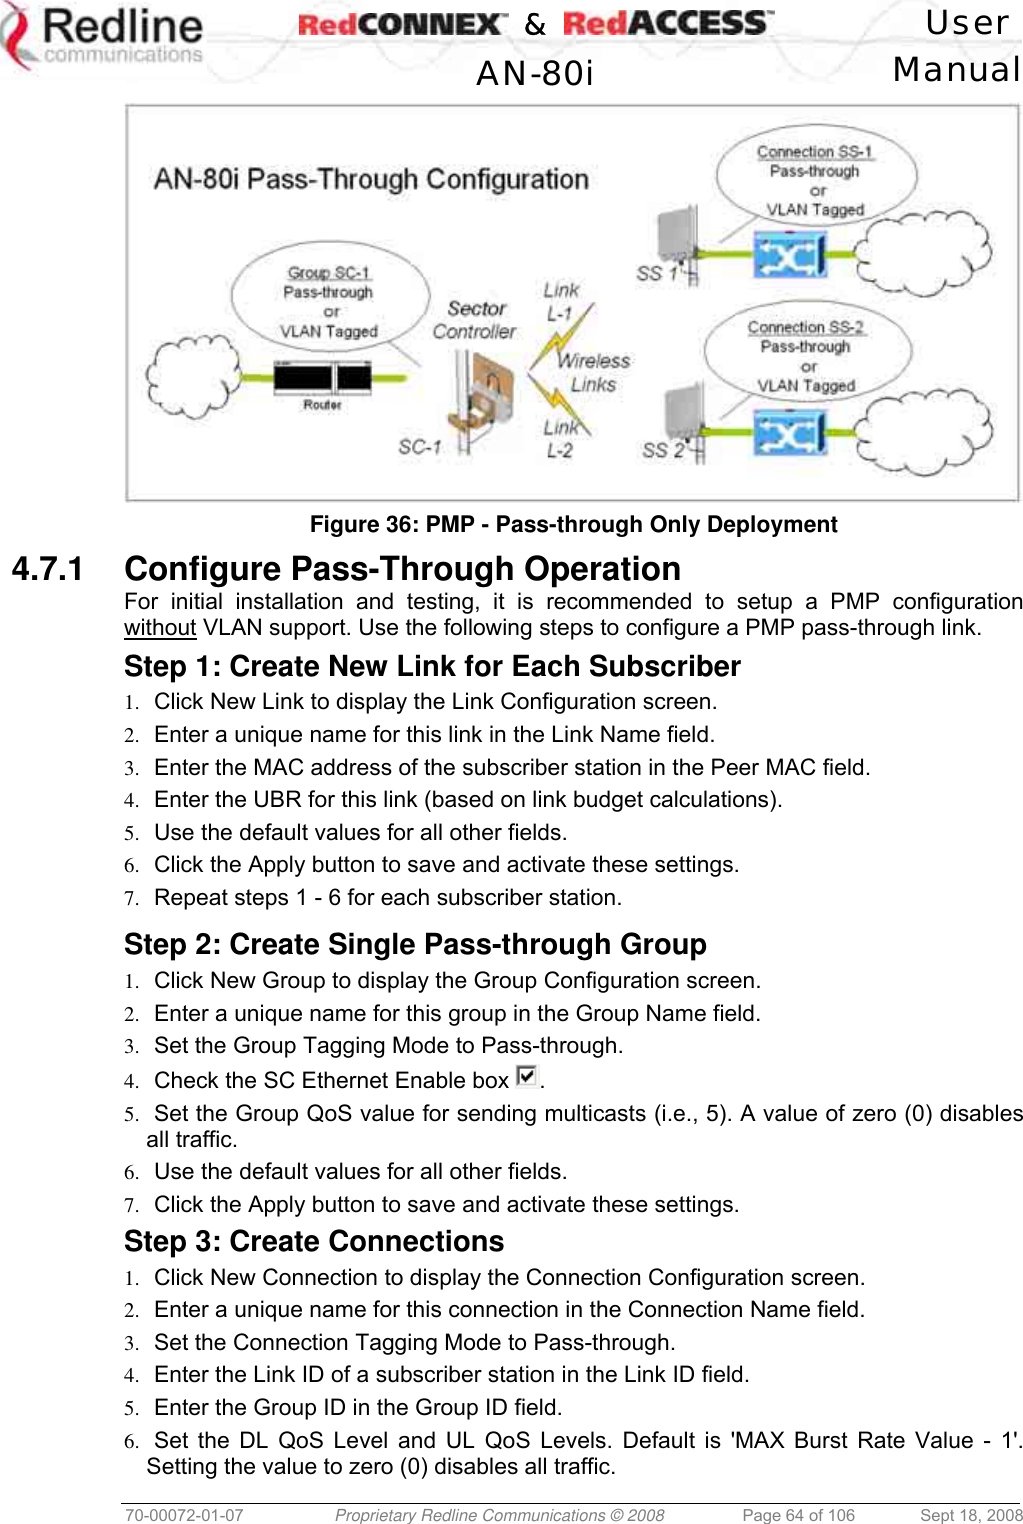    &amp;  User  AN-80i Manual  70-00072-01-07  Proprietary Redline Communications © 2008  Page 64 of 106  Sept 18, 2008  Figure 36: PMP - Pass-through Only Deployment 4.7.1  Configure Pass-Through Operation  For initial installation and testing, it is recommended to setup a PMP configuration without VLAN support. Use the following steps to configure a PMP pass-through link. Step 1: Create New Link for Each Subscriber 1.  Click New Link to display the Link Configuration screen. 2.  Enter a unique name for this link in the Link Name field. 3.  Enter the MAC address of the subscriber station in the Peer MAC field. 4.  Enter the UBR for this link (based on link budget calculations). 5.  Use the default values for all other fields. 6.  Click the Apply button to save and activate these settings. 7.  Repeat steps 1 - 6 for each subscriber station.  Step 2: Create Single Pass-through Group 1.  Click New Group to display the Group Configuration screen. 2.  Enter a unique name for this group in the Group Name field.  3.  Set the Group Tagging Mode to Pass-through. 4.  Check the SC Ethernet Enable box  . 5.  Set the Group QoS value for sending multicasts (i.e., 5). A value of zero (0) disables all traffic. 6.  Use the default values for all other fields. 7.  Click the Apply button to save and activate these settings. Step 3: Create Connections 1.  Click New Connection to display the Connection Configuration screen. 2.  Enter a unique name for this connection in the Connection Name field. 3.  Set the Connection Tagging Mode to Pass-through. 4.  Enter the Link ID of a subscriber station in the Link ID field. 5.  Enter the Group ID in the Group ID field. 6.  Set the DL QoS Level and UL QoS Levels. Default is &apos;MAX Burst Rate Value - 1&apos;. Setting the value to zero (0) disables all traffic. 